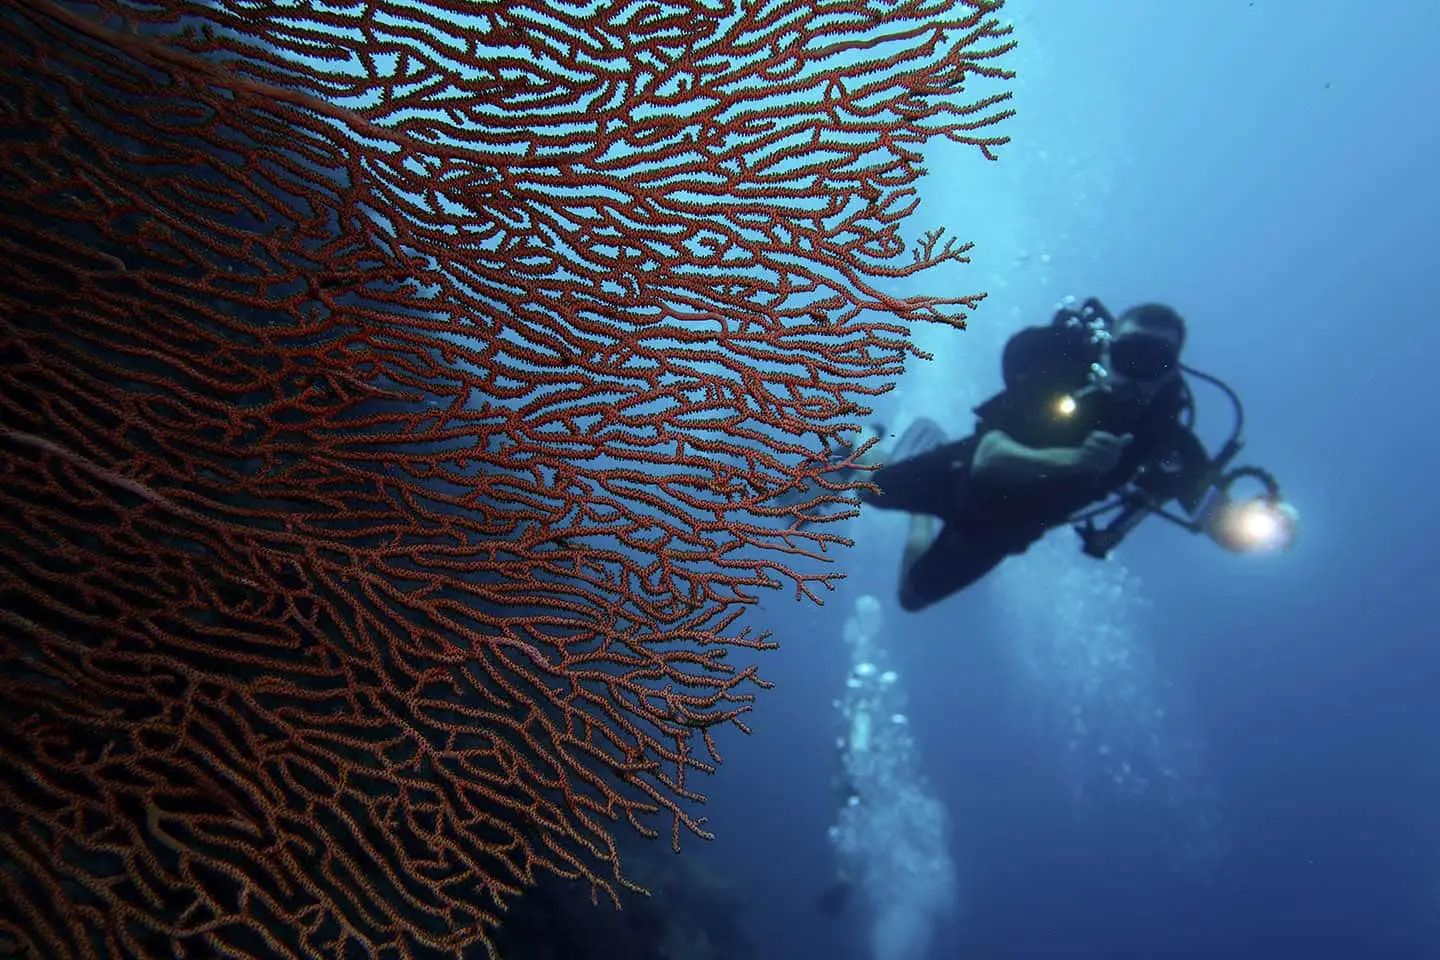 Large sea fans  in Balicasag, Bohol Philippines